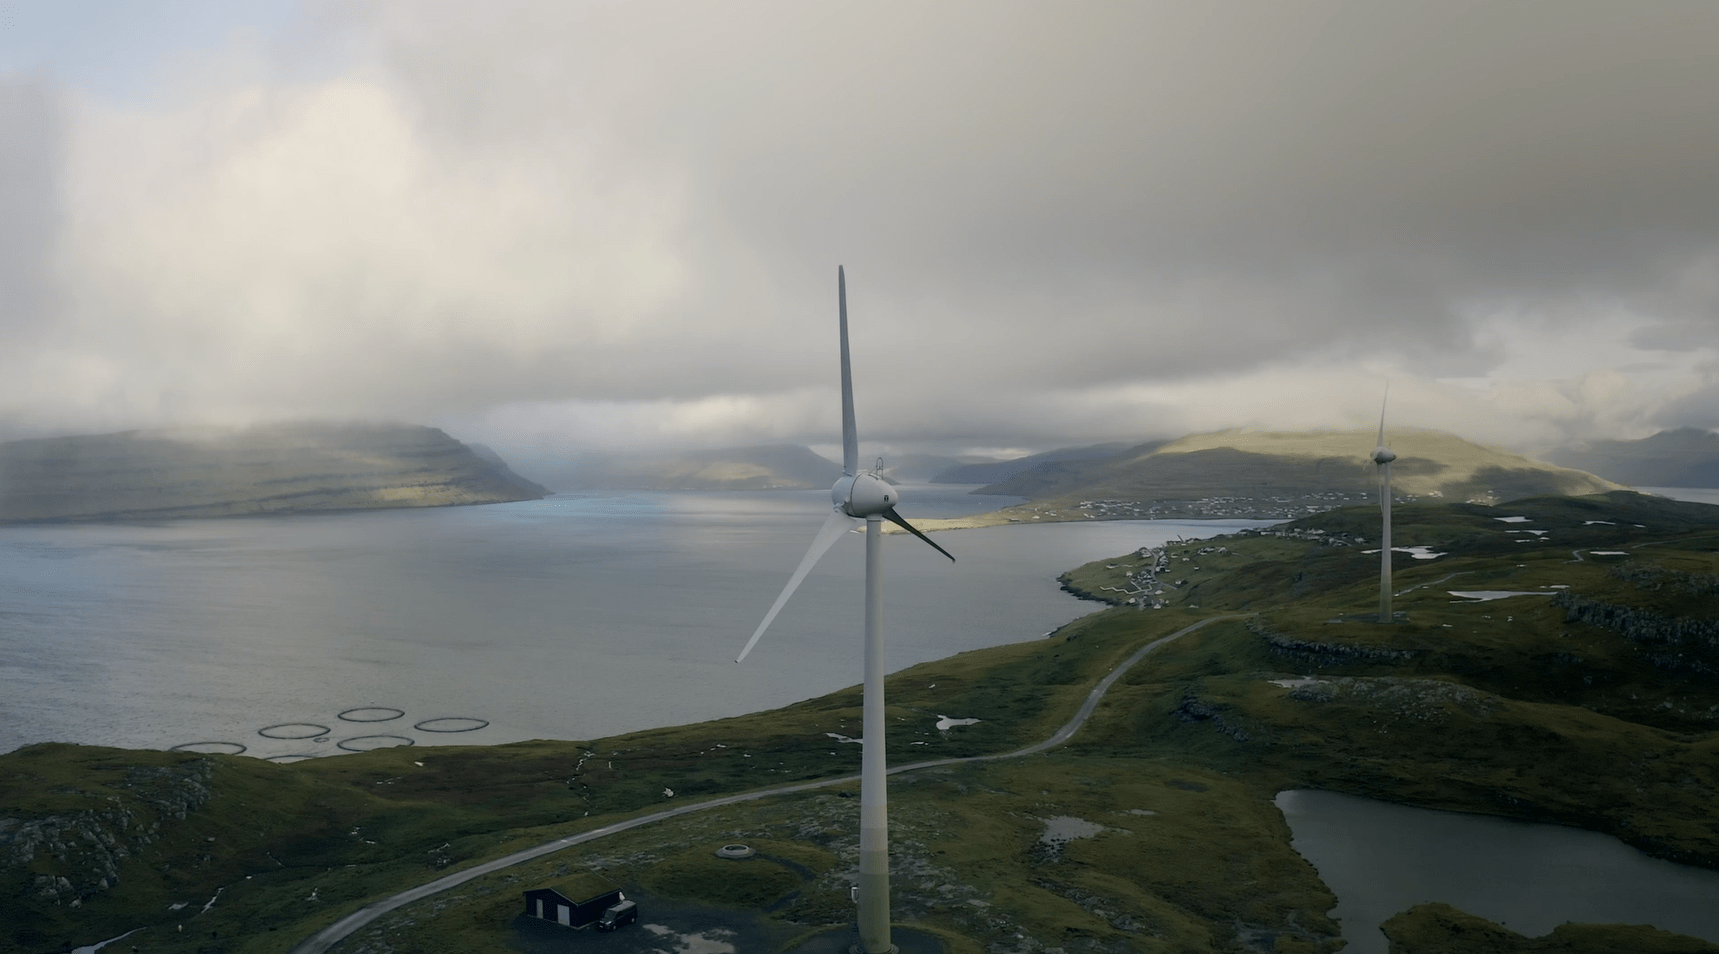 World-First Enercon E44 Wind Turbine Repair and Life-Extension Project Complete